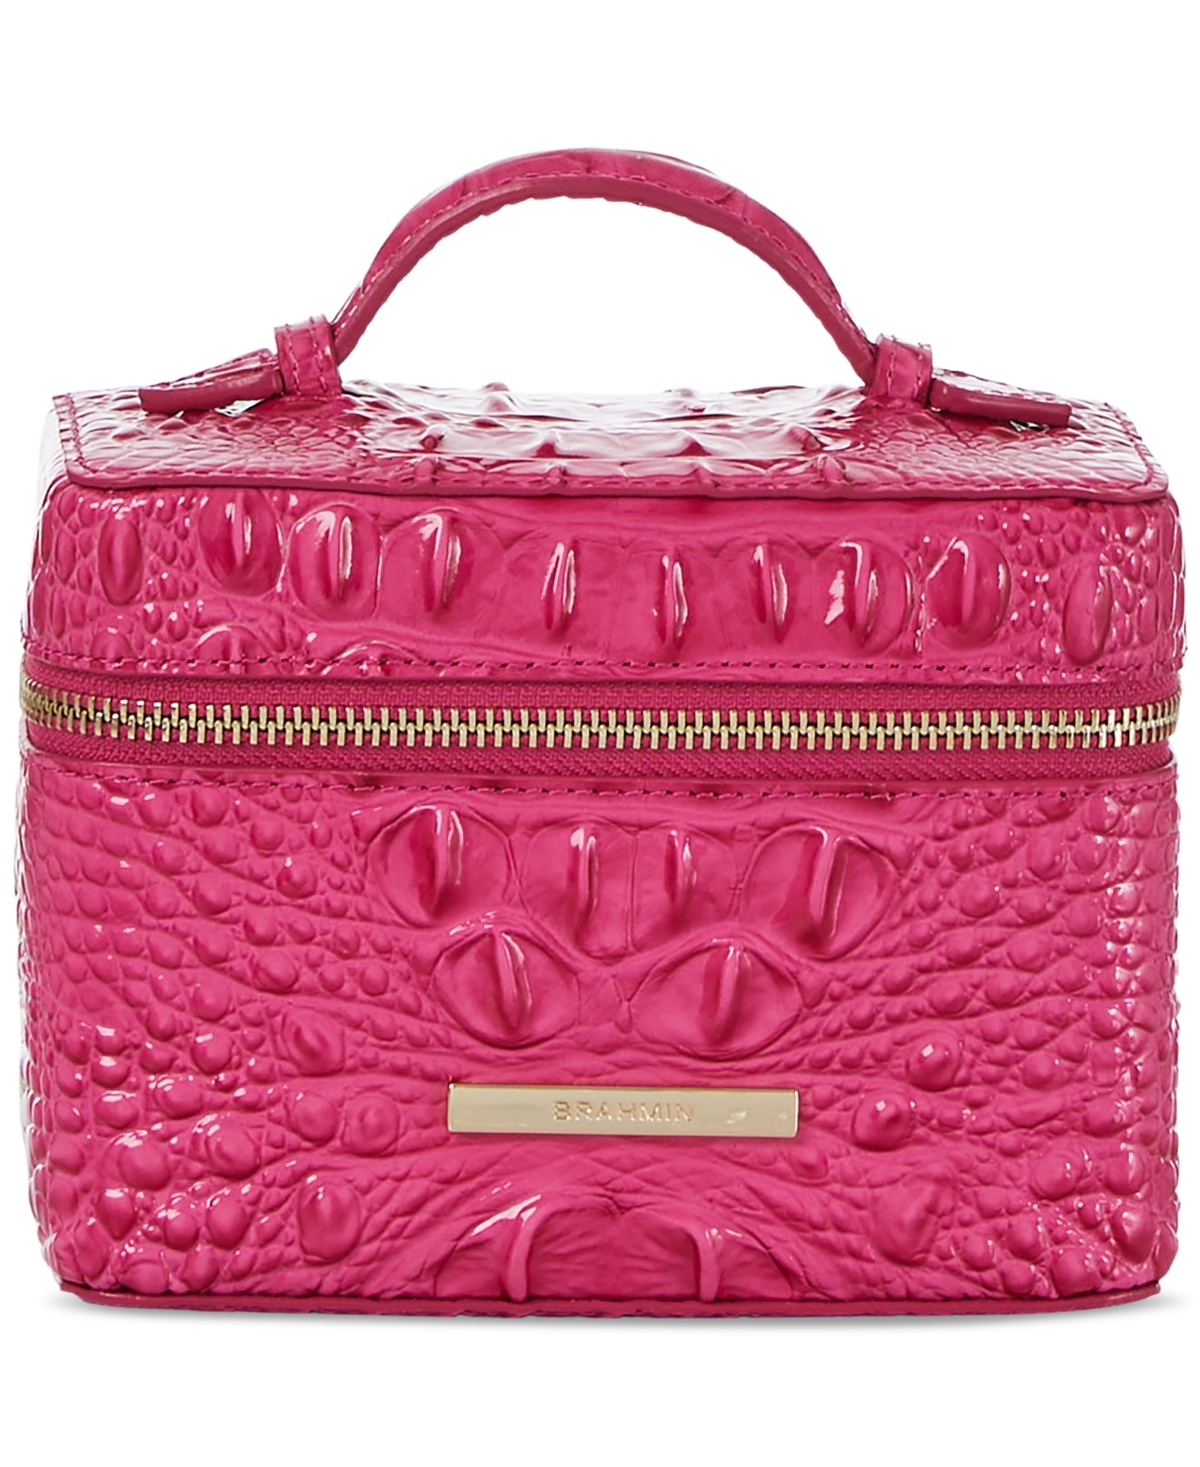 Brahmin Charmaine Leather Travel Cosmetic Case In Pink